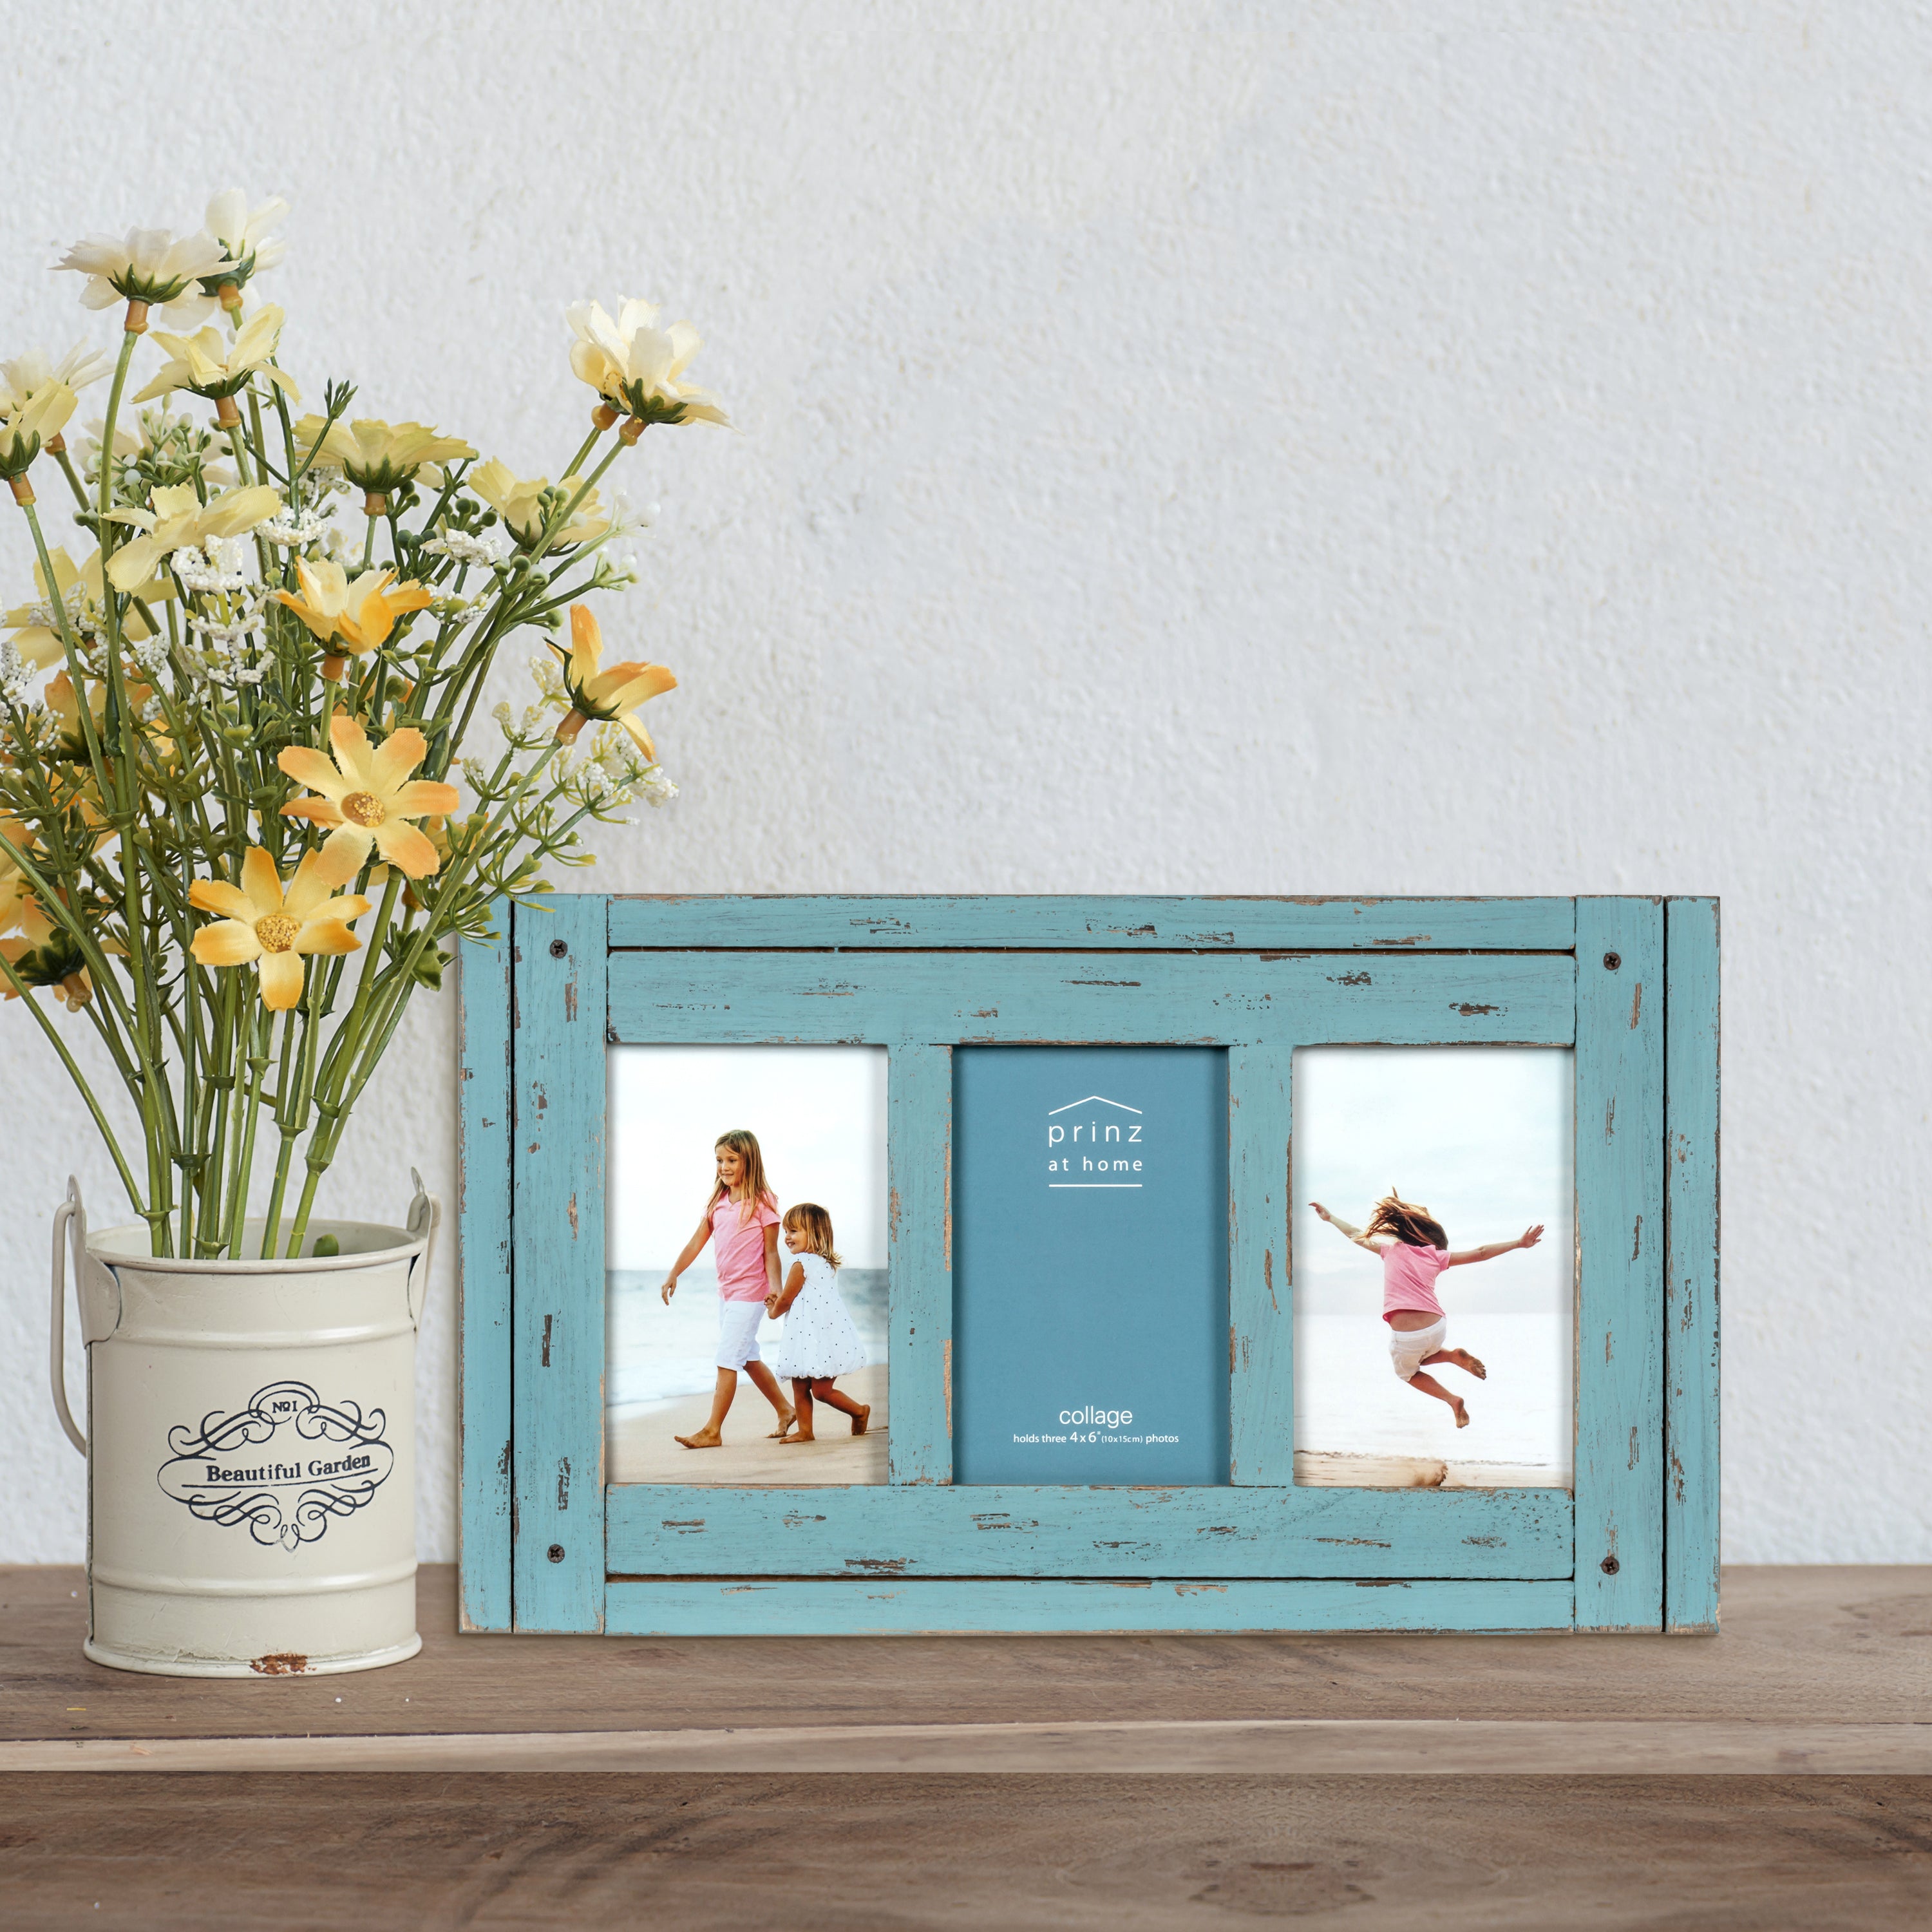 Homestead Collage 4-inch by 6-inch Picture Frame for Three Photos, Distressed Blue